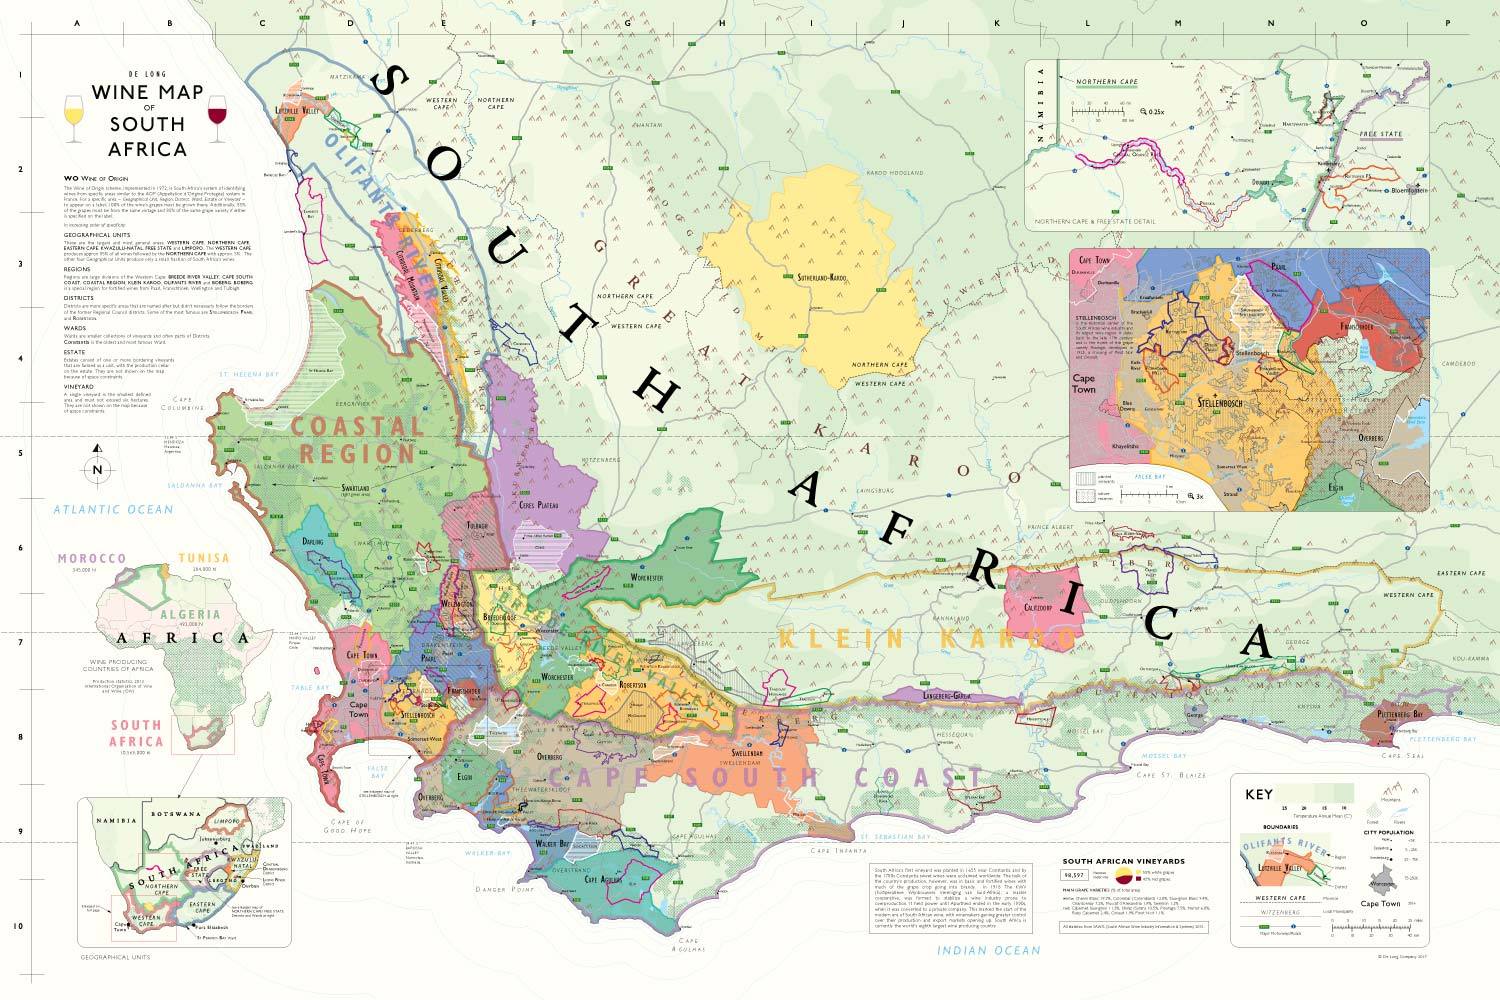 Wine Maps of the World South Africa | De Long